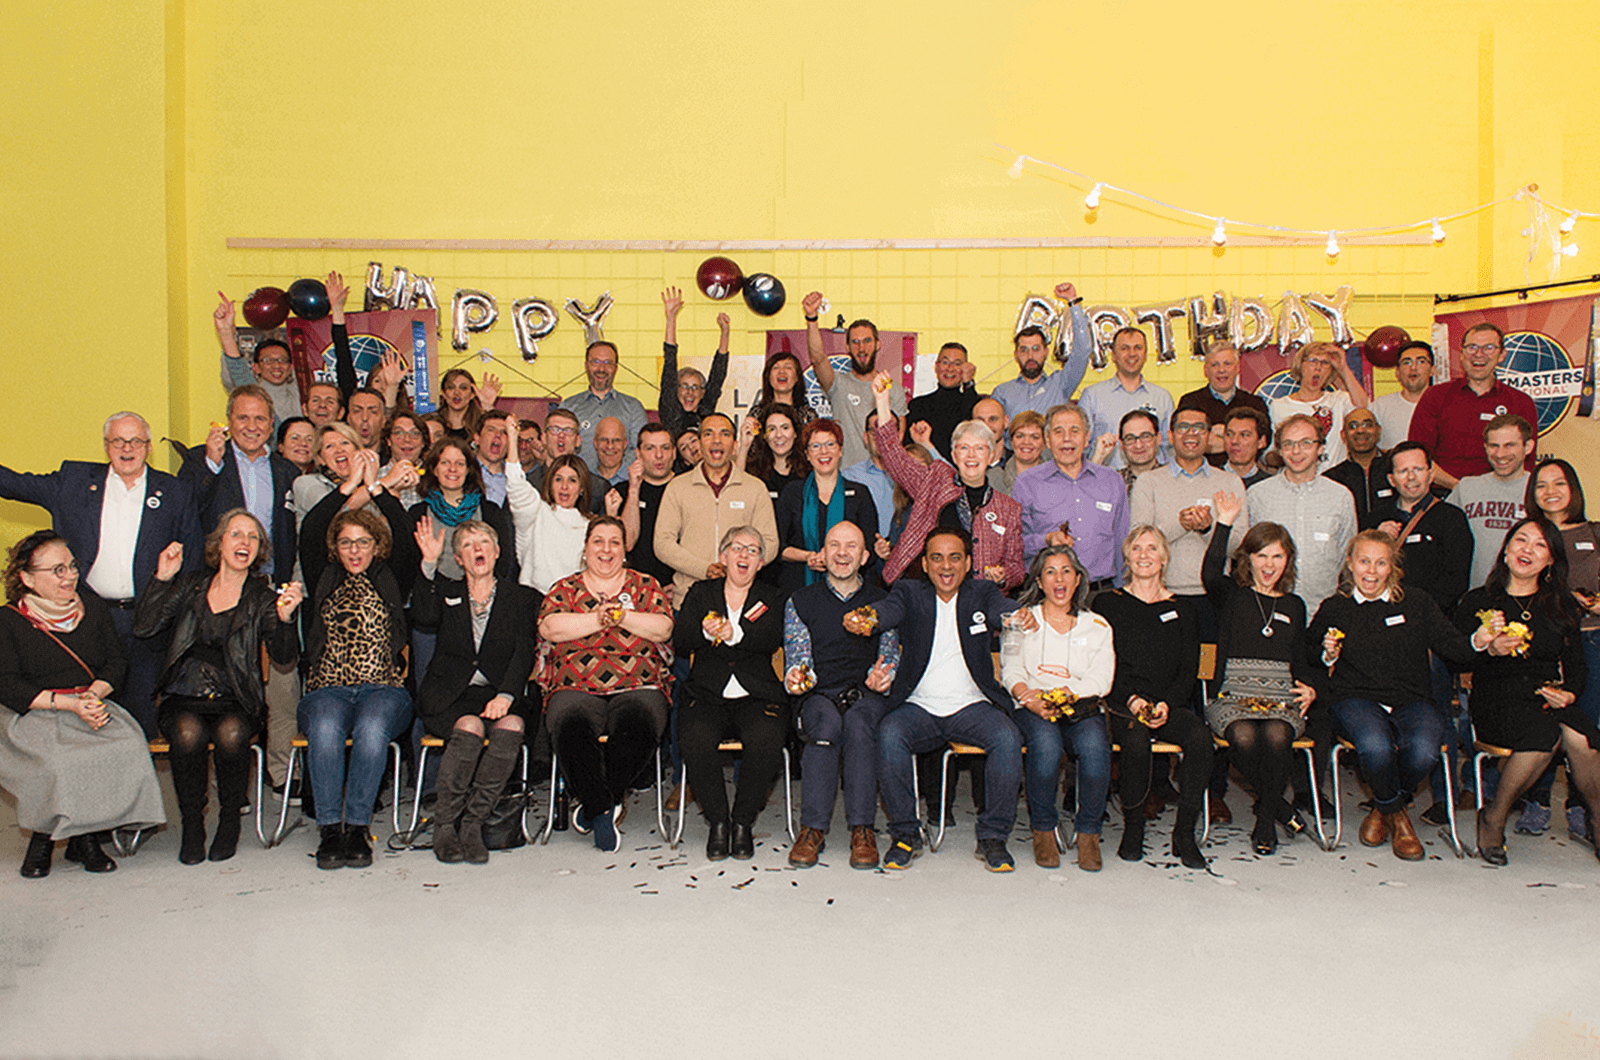 Large group of Toastmasters from Switzerland celebrating with hands in the air